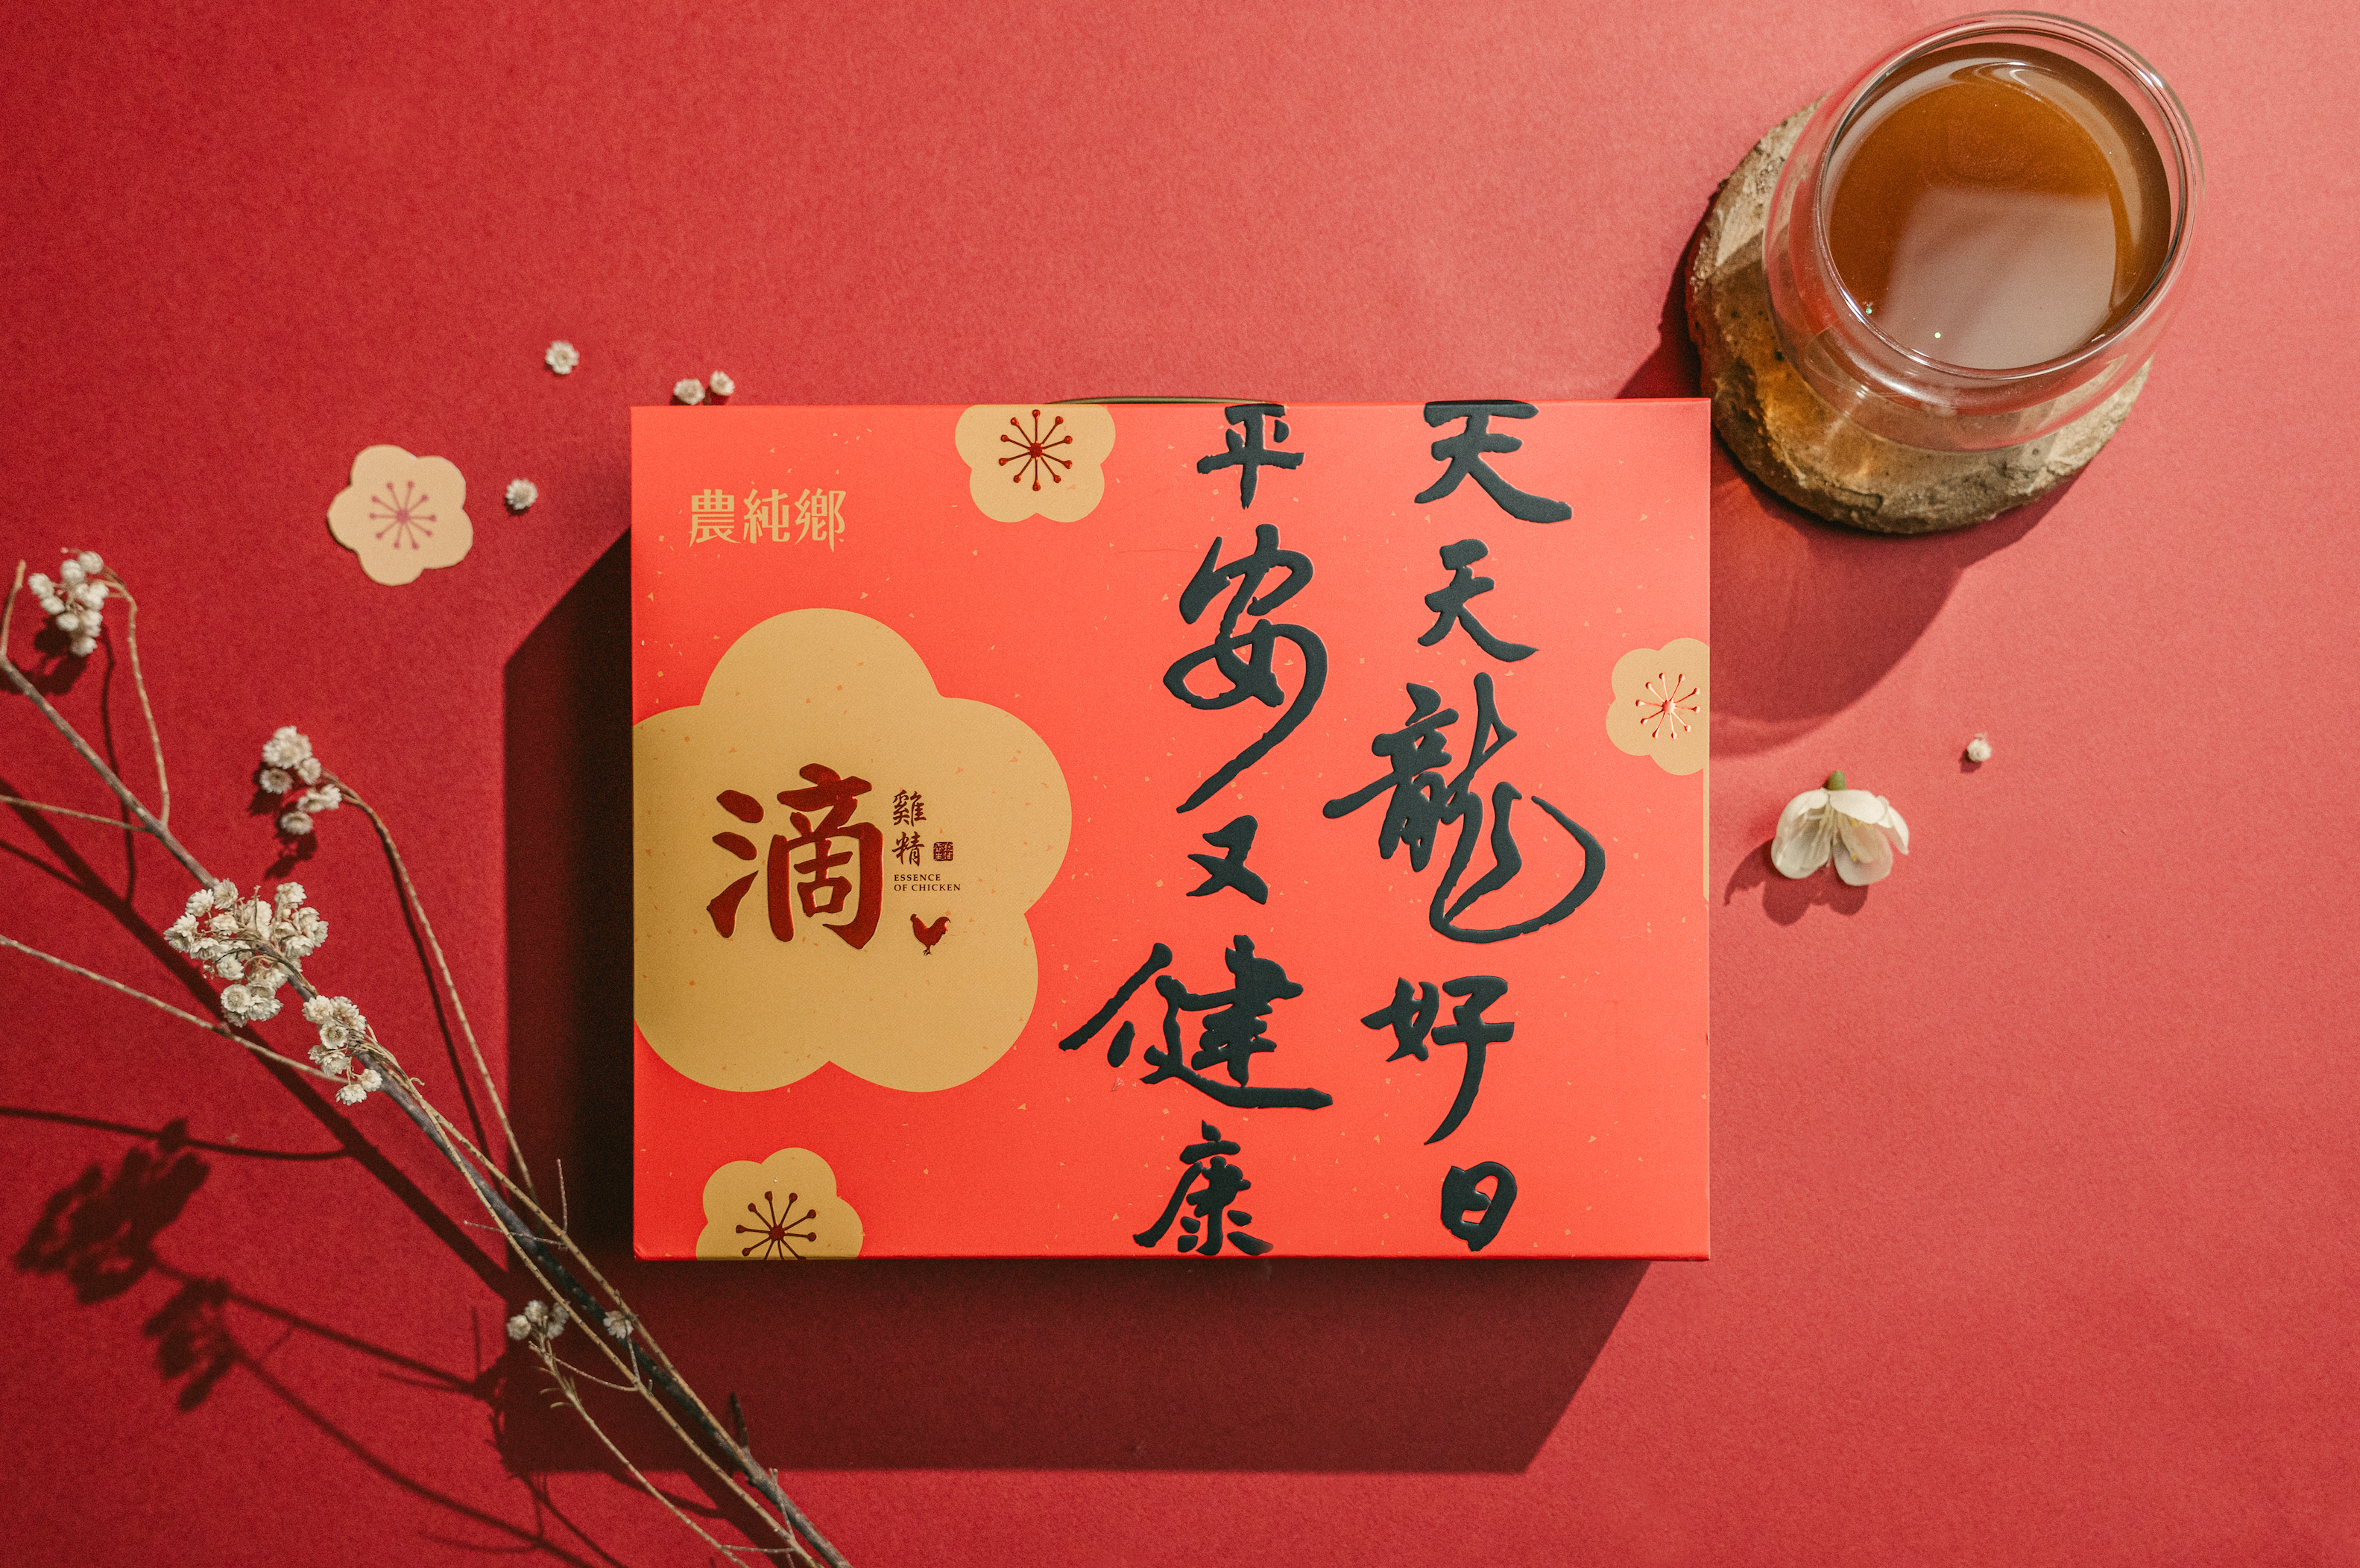 Nong Chun Xiang Chicken Essence【Dragon Year Limited Edition】x 2 packs【Two weeks Confinement】